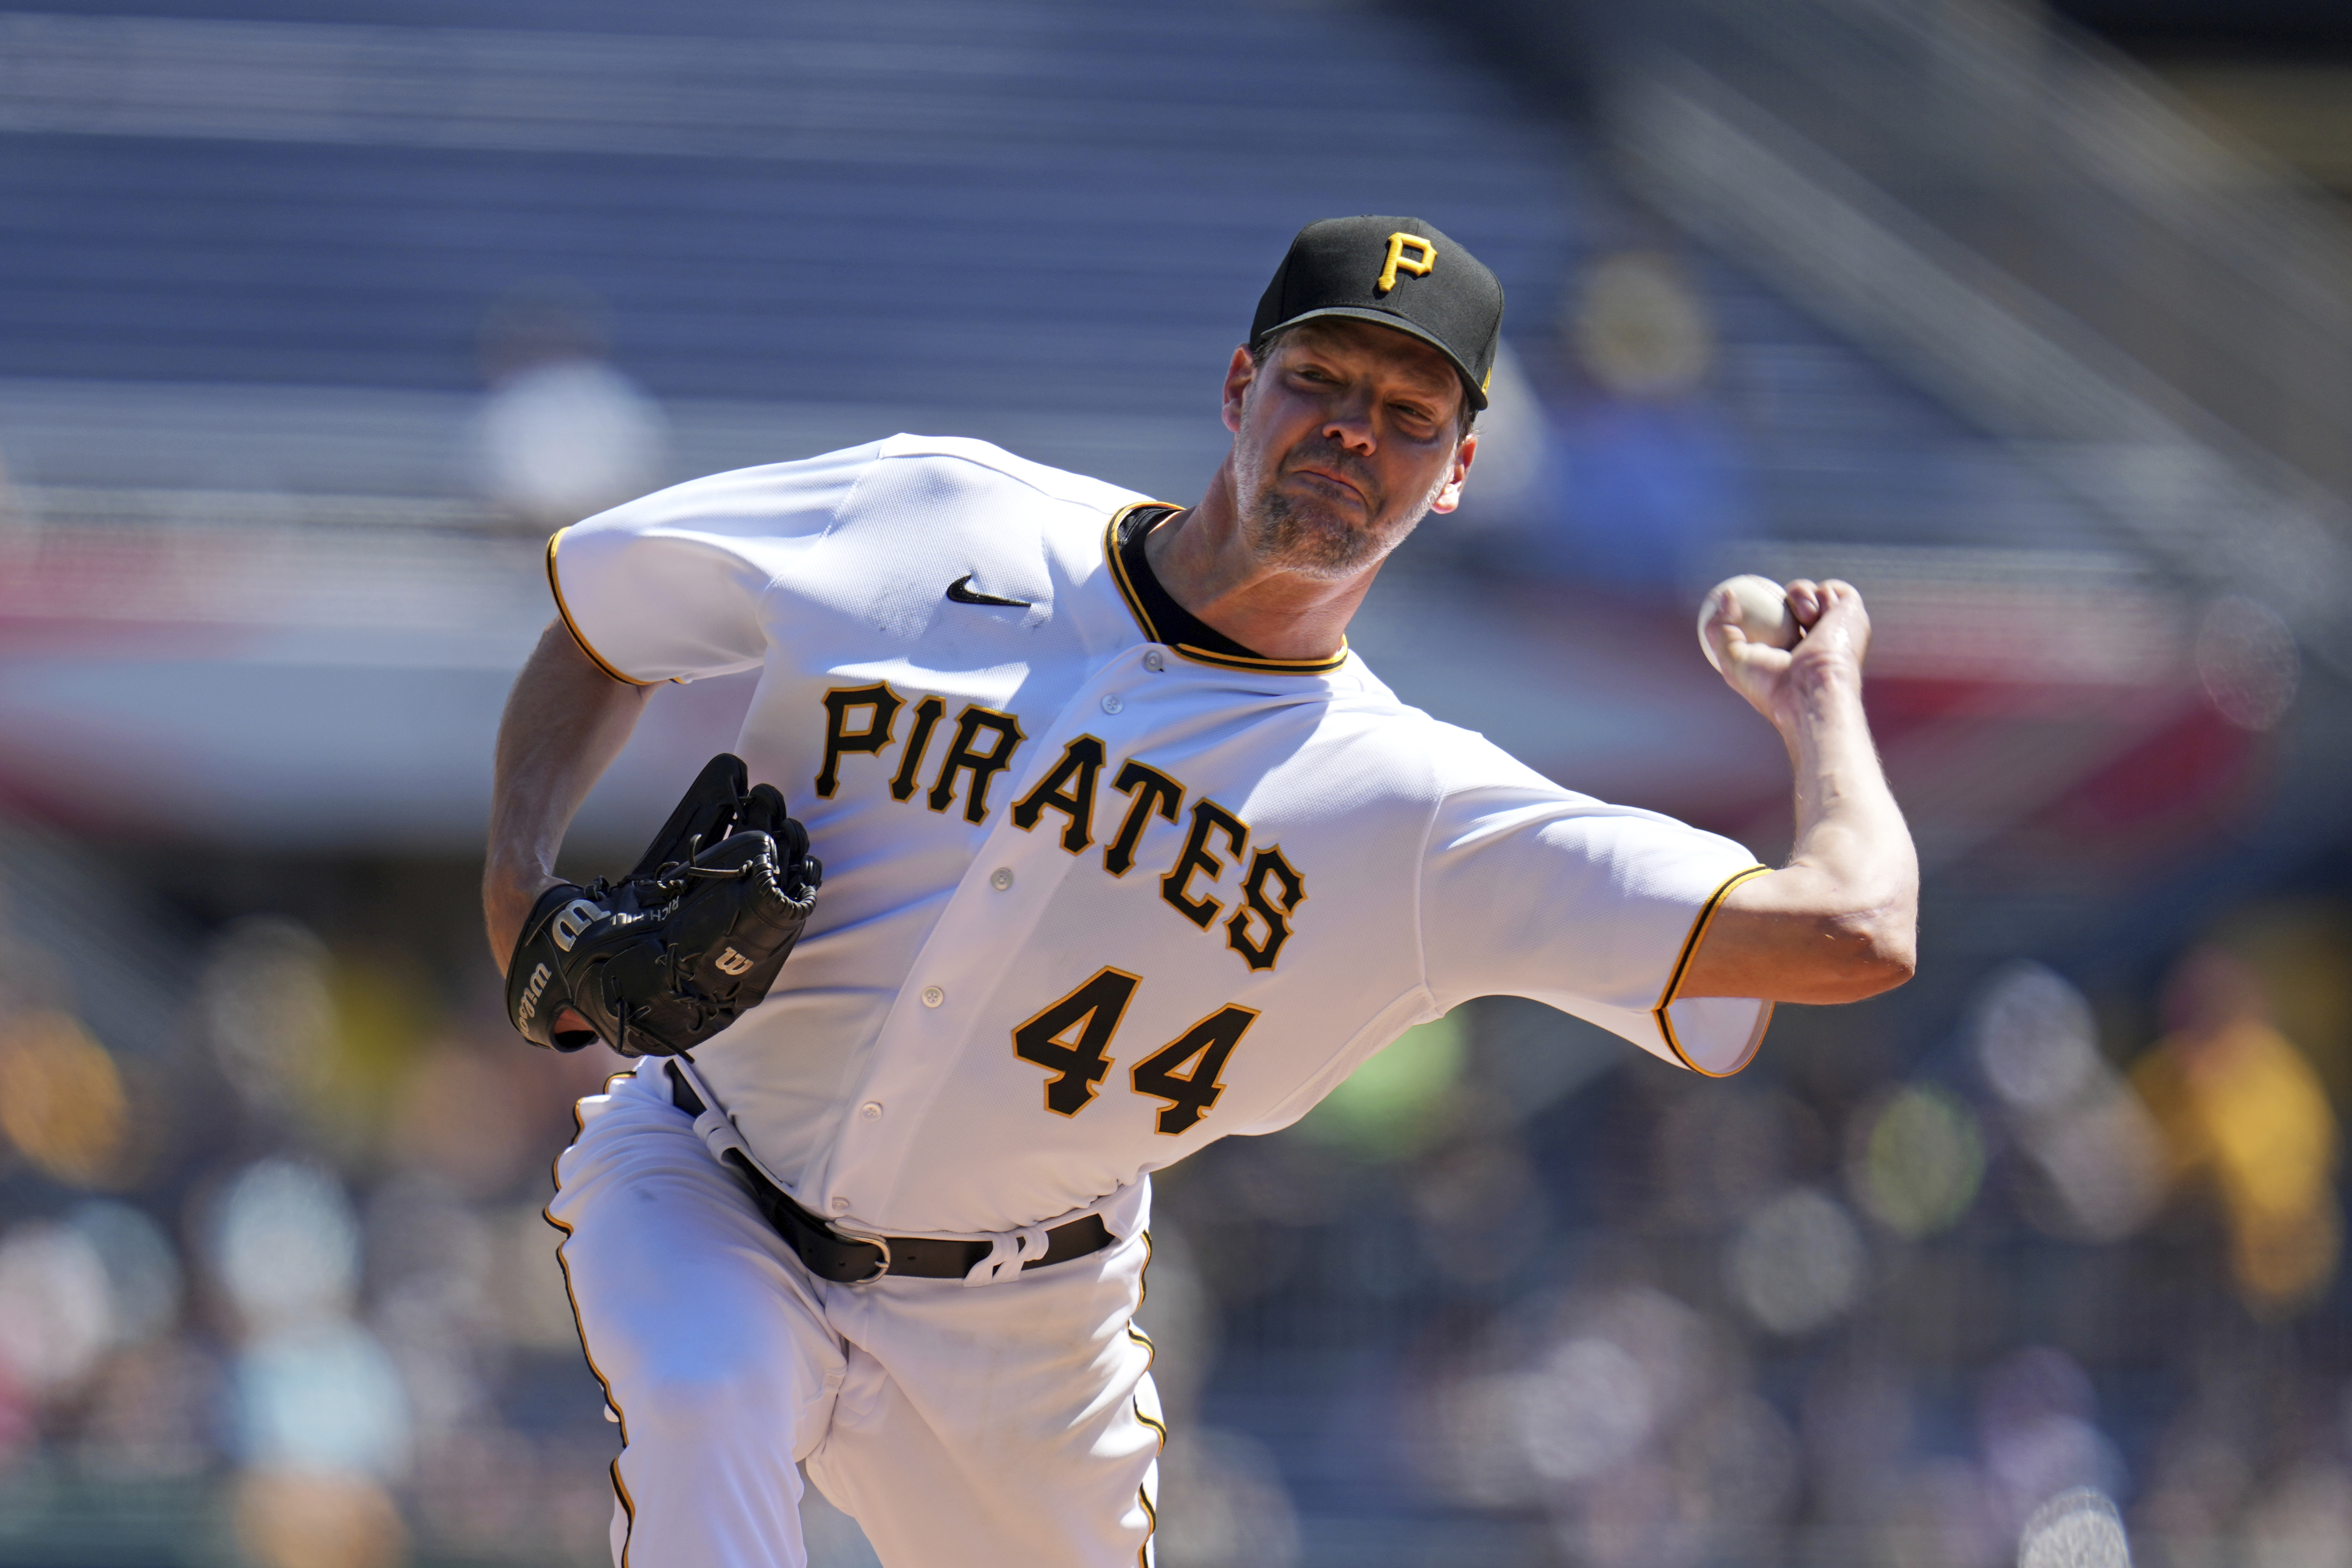 Pirates' Rich Hill improves, but loses to Astros - The Boston Globe